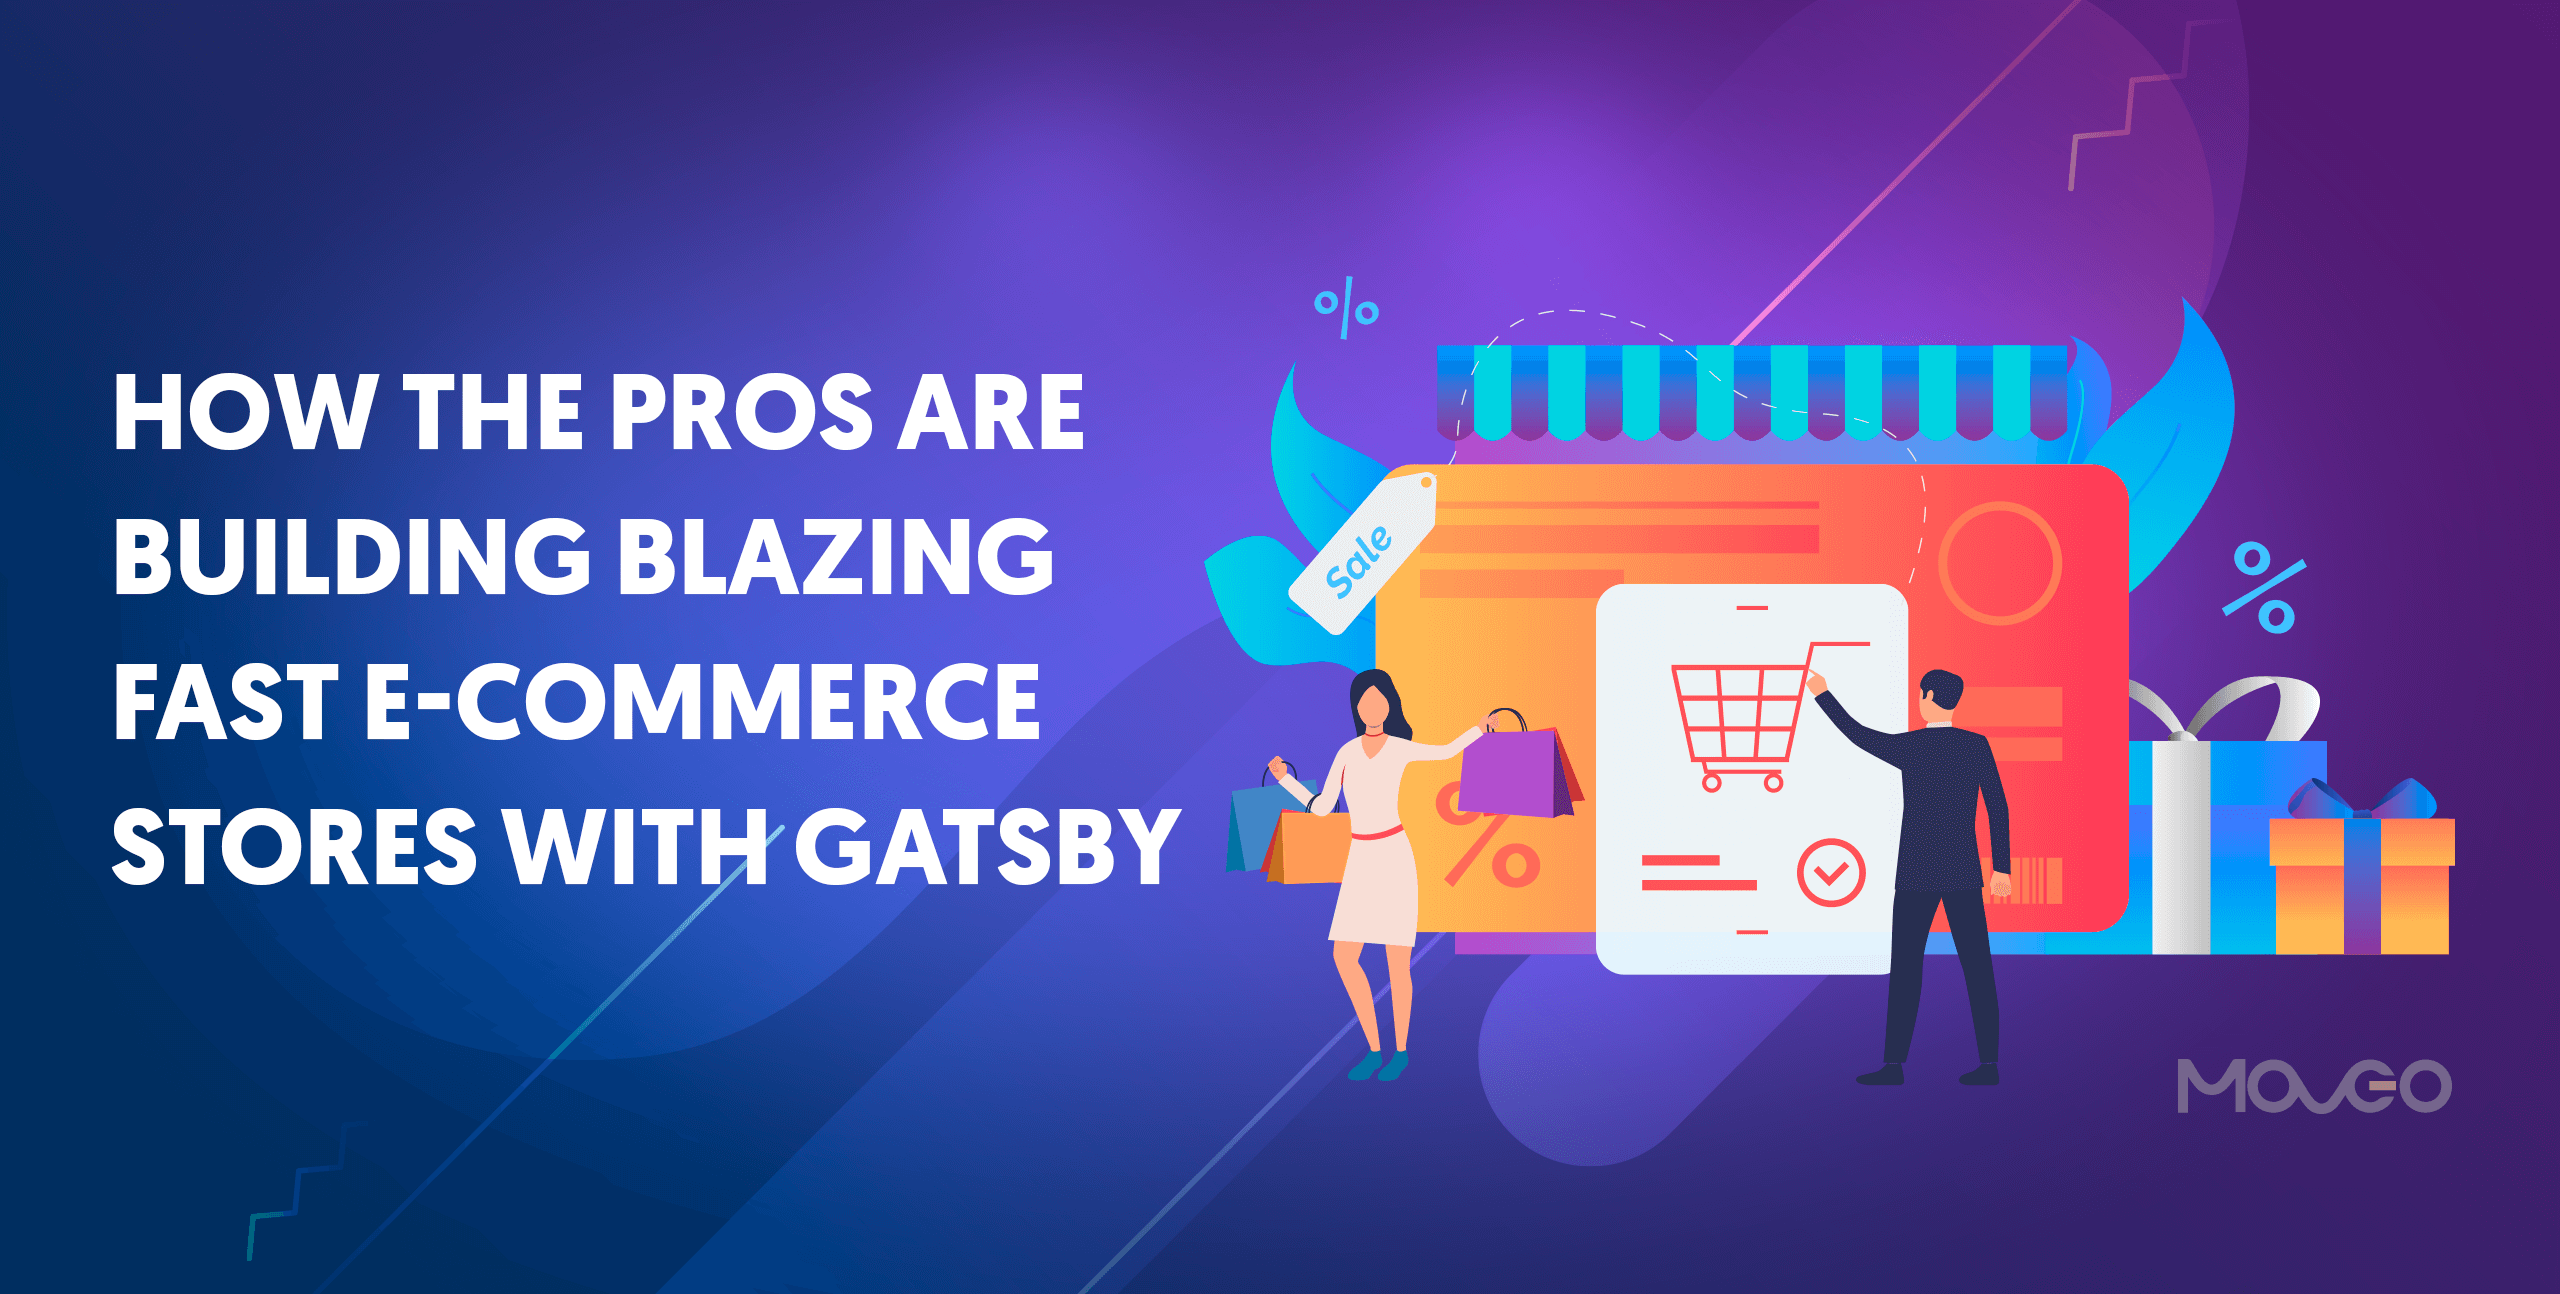 how the pros are building blazing fast e-commerce stores with gatsby